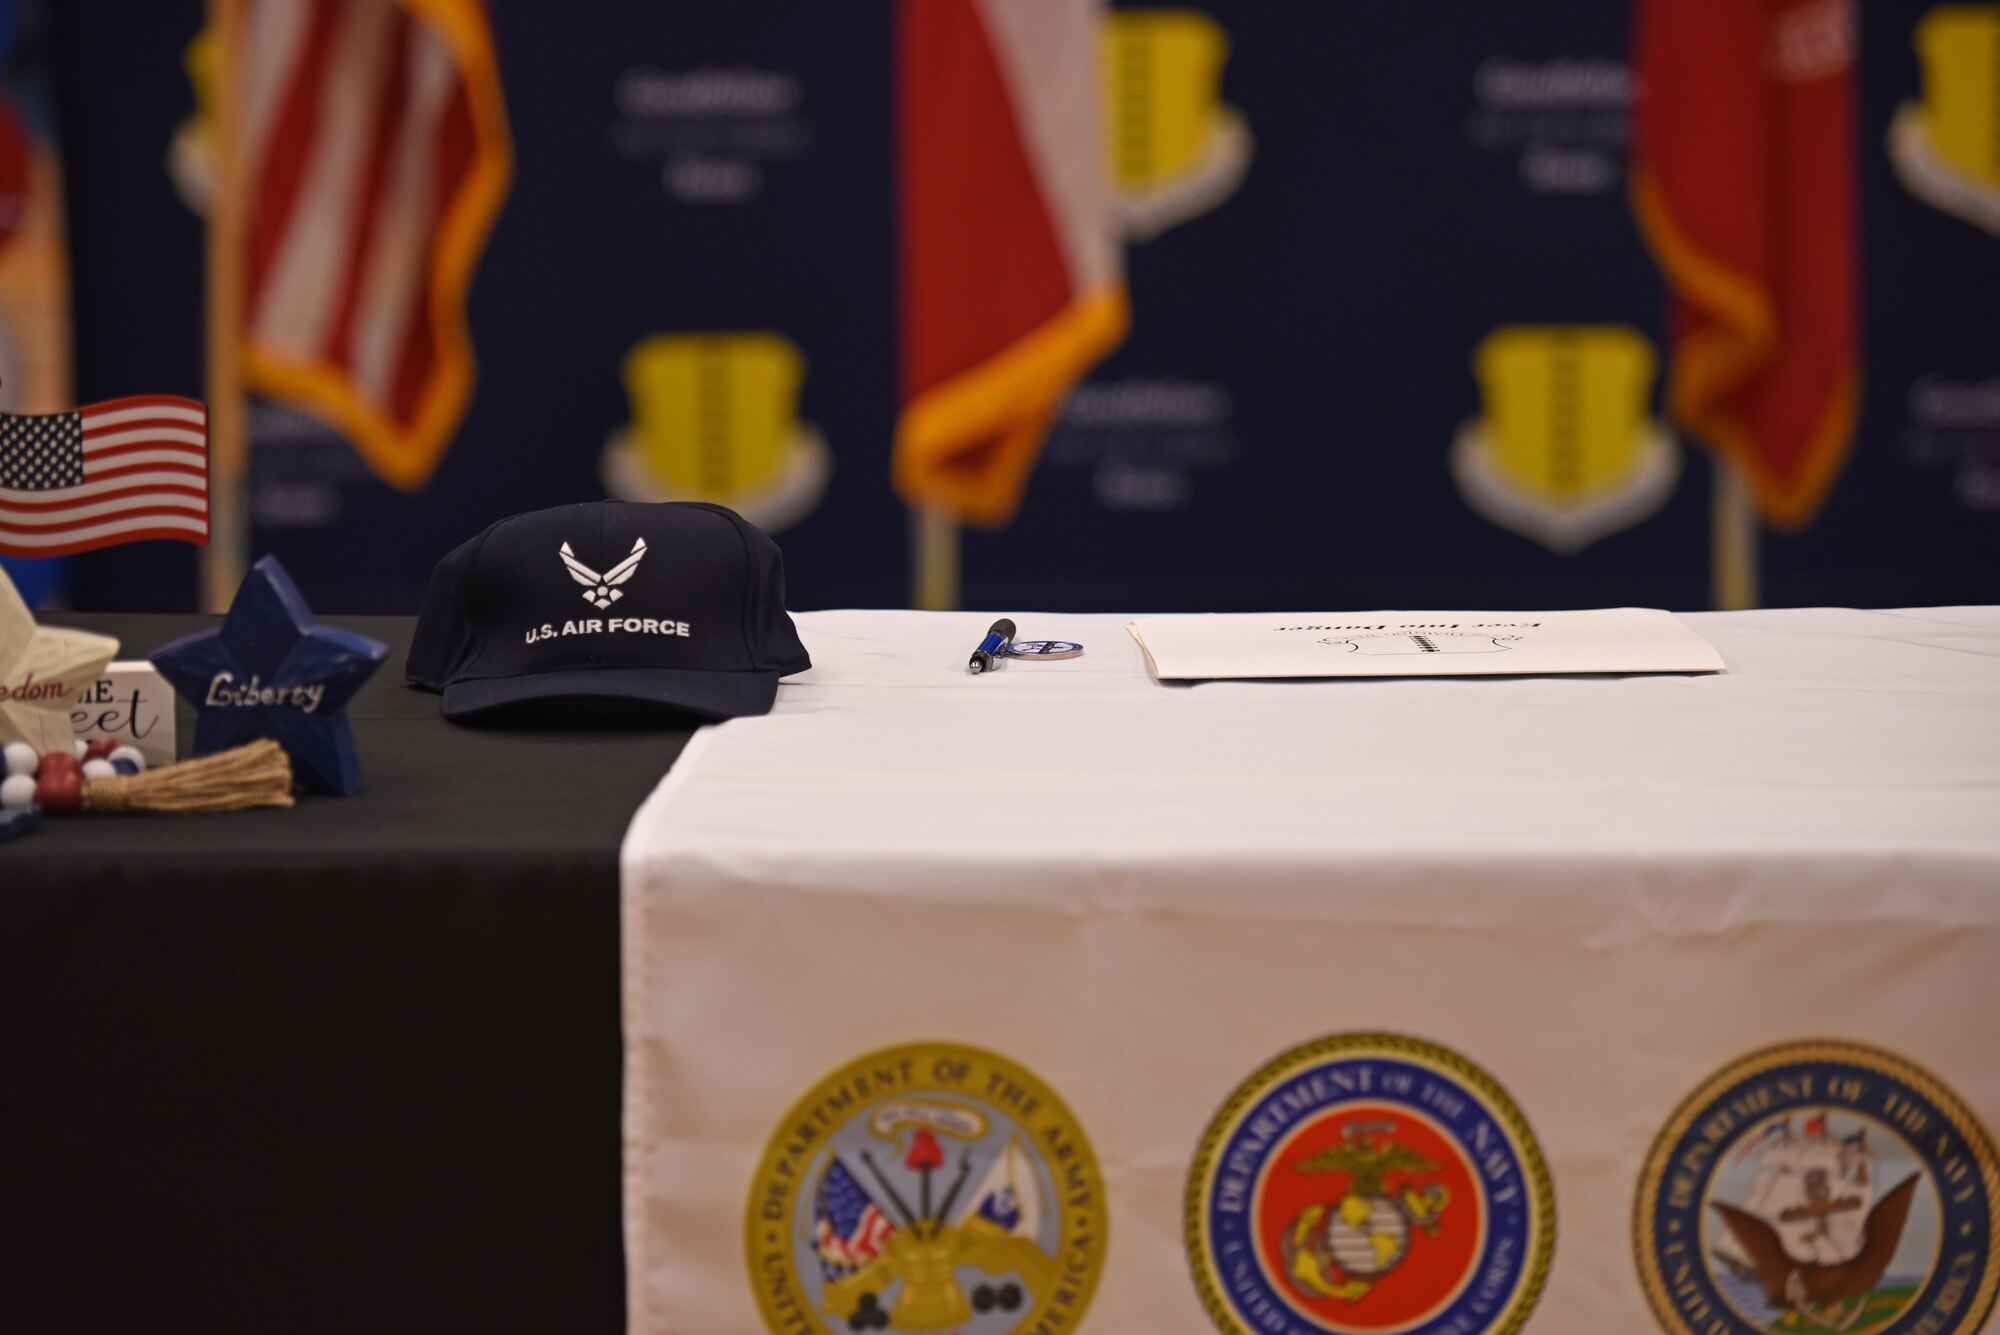 A U.S. Air Force hat and commitment letter sit on a table at the Goodfellow Air Force Base Armed Forces Commitment Celebration, at Goodfellow AFB, Texas, May 12. 13 students from Central High School and Lake View High School celebrated their commitment, whether it be the Reserve Officers’ Training Corps, going active duty or attending military academies. (U.S. Air Force photo by Senior Airman Ashley Thrash)